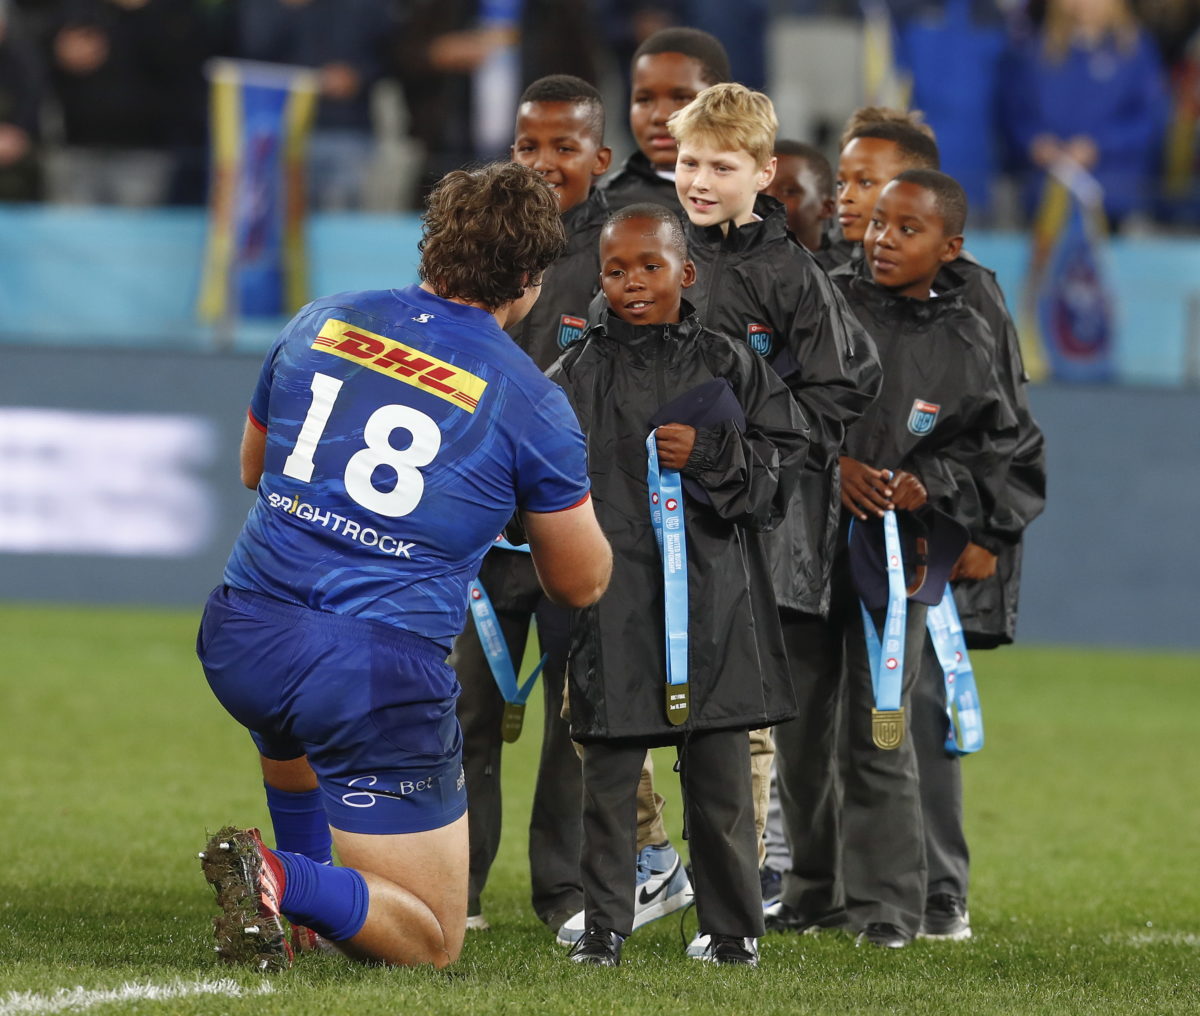 epa10021116 A South African boy presents a winners medal to Neethling Fouche of the Stormers after winning the United Rugby Championship (URC) 2021/22 Final between the Stormers and the Bulls in Cape Town, South Africa, 18 June 2022.